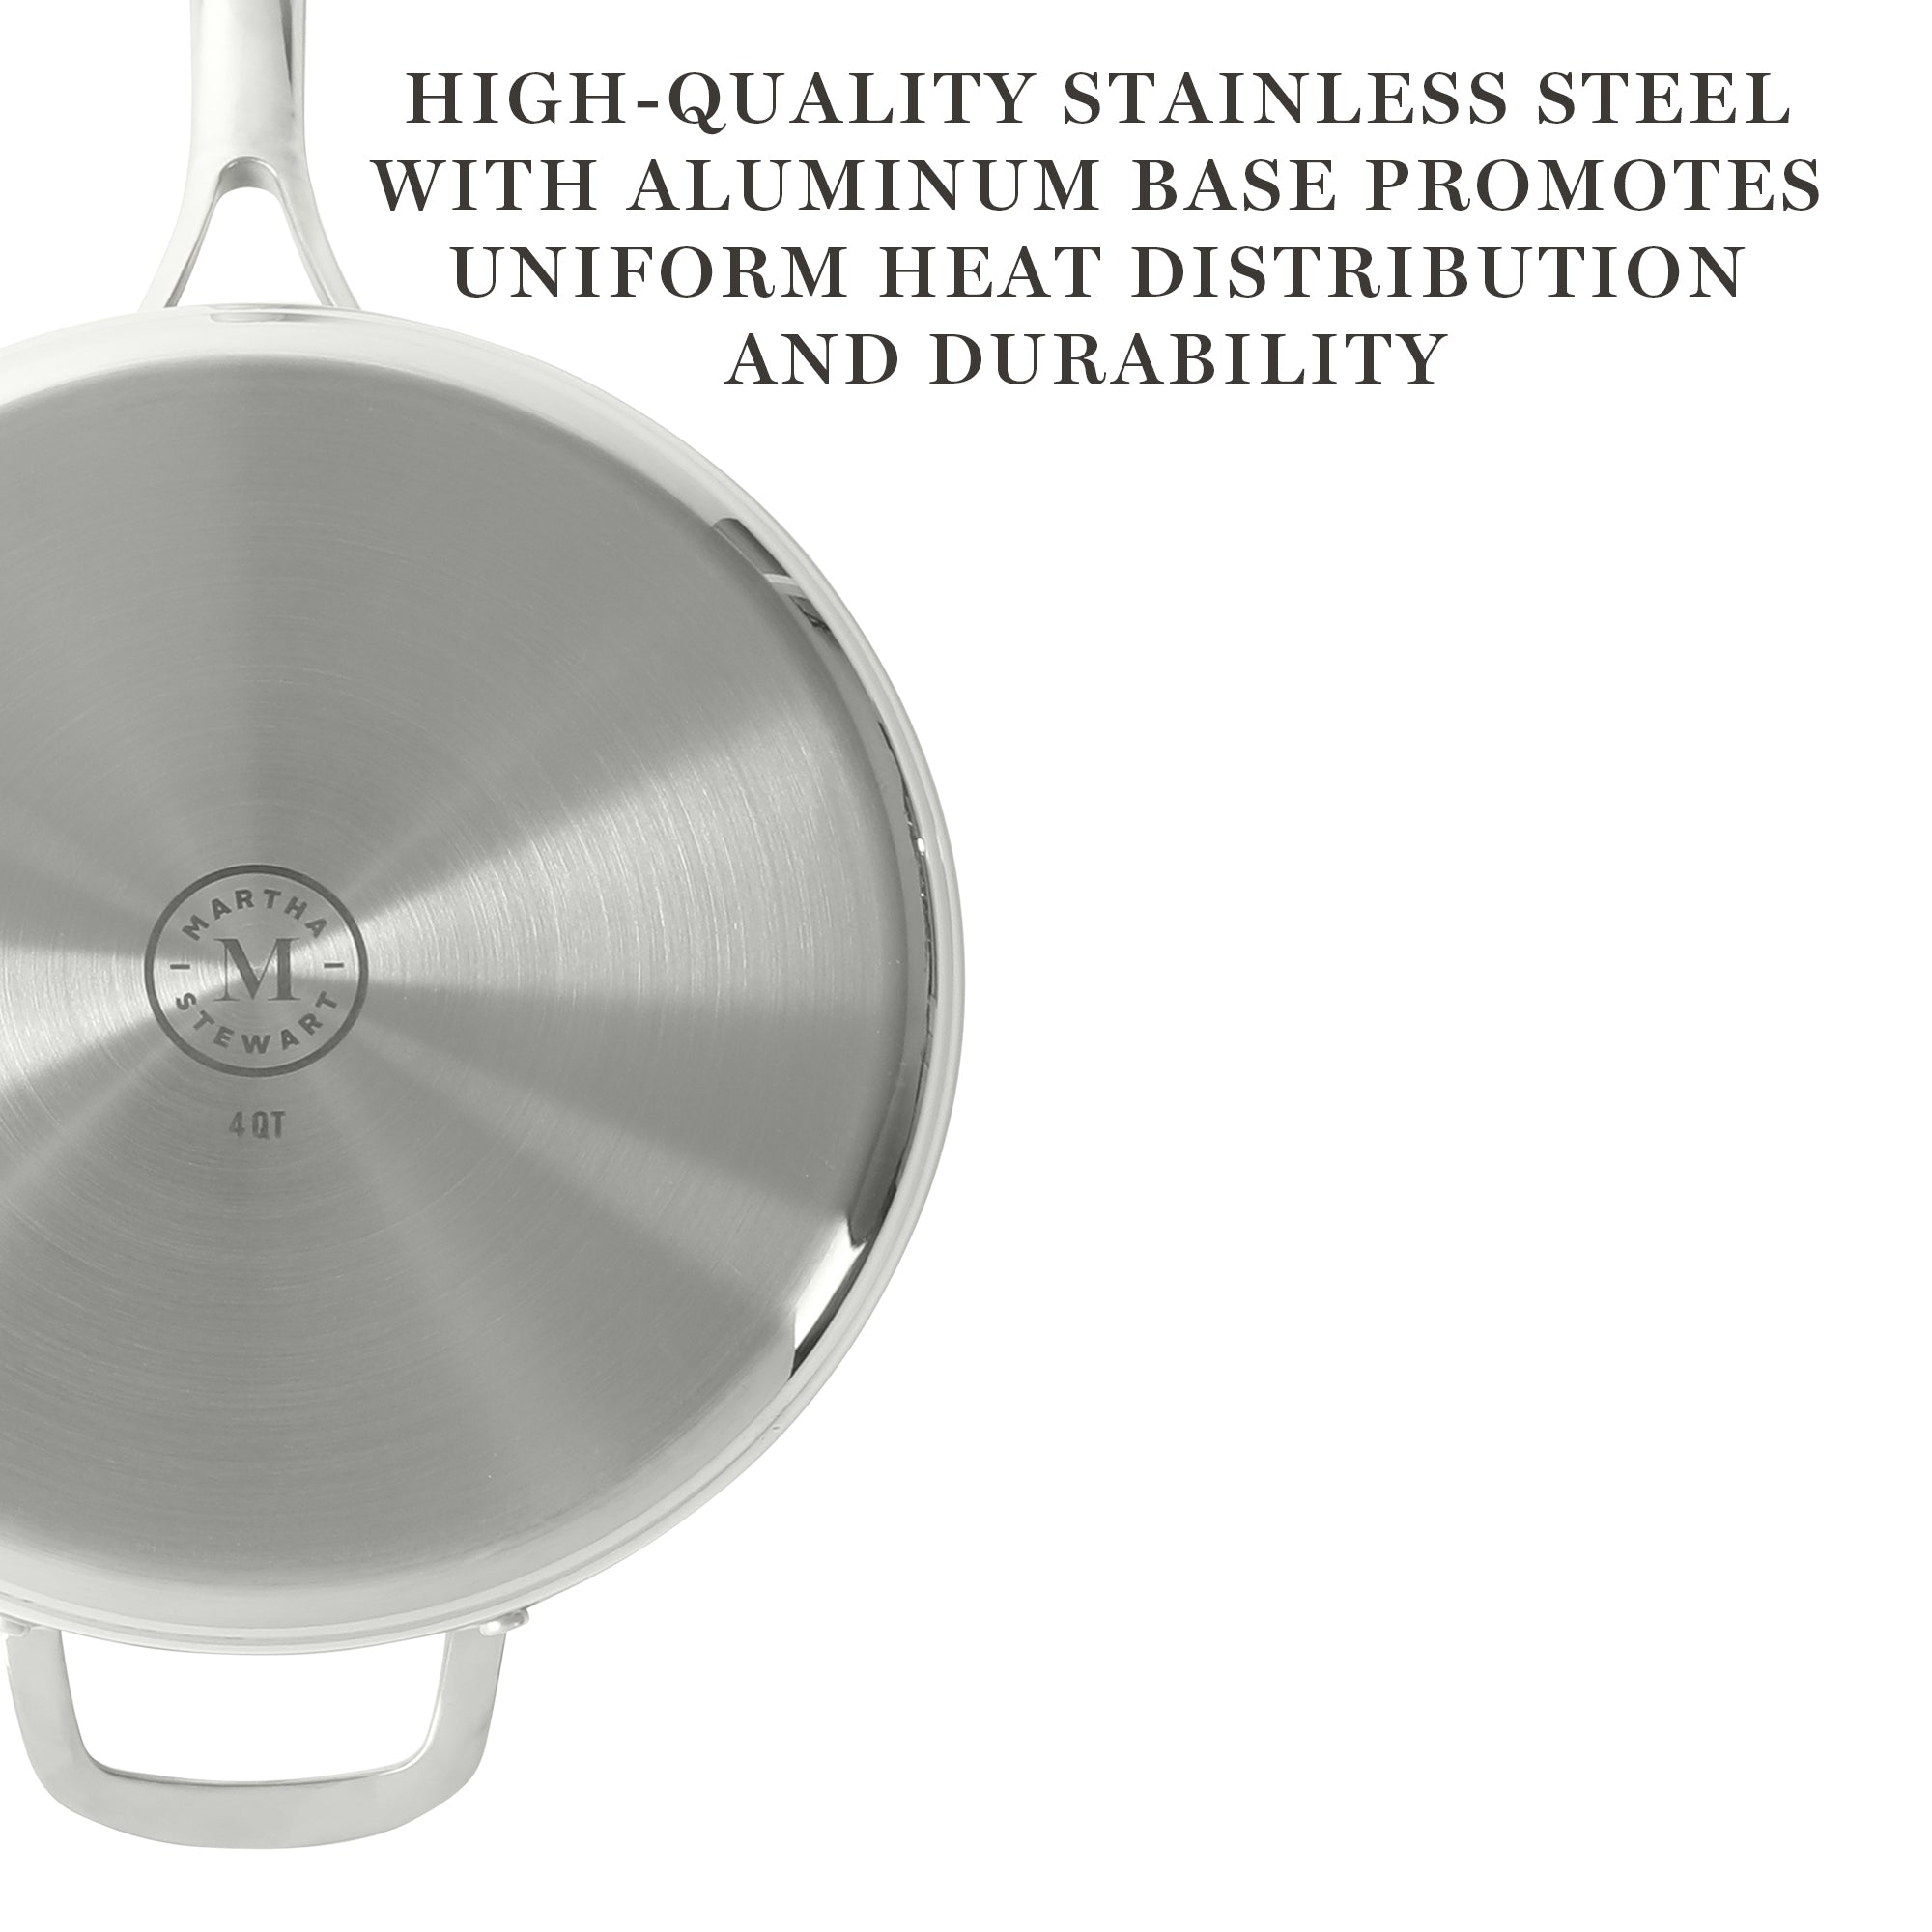 Tri-Ply Base 10 in Stainless Steel Fry Pan with Nonstick Interior -  Tramontina US